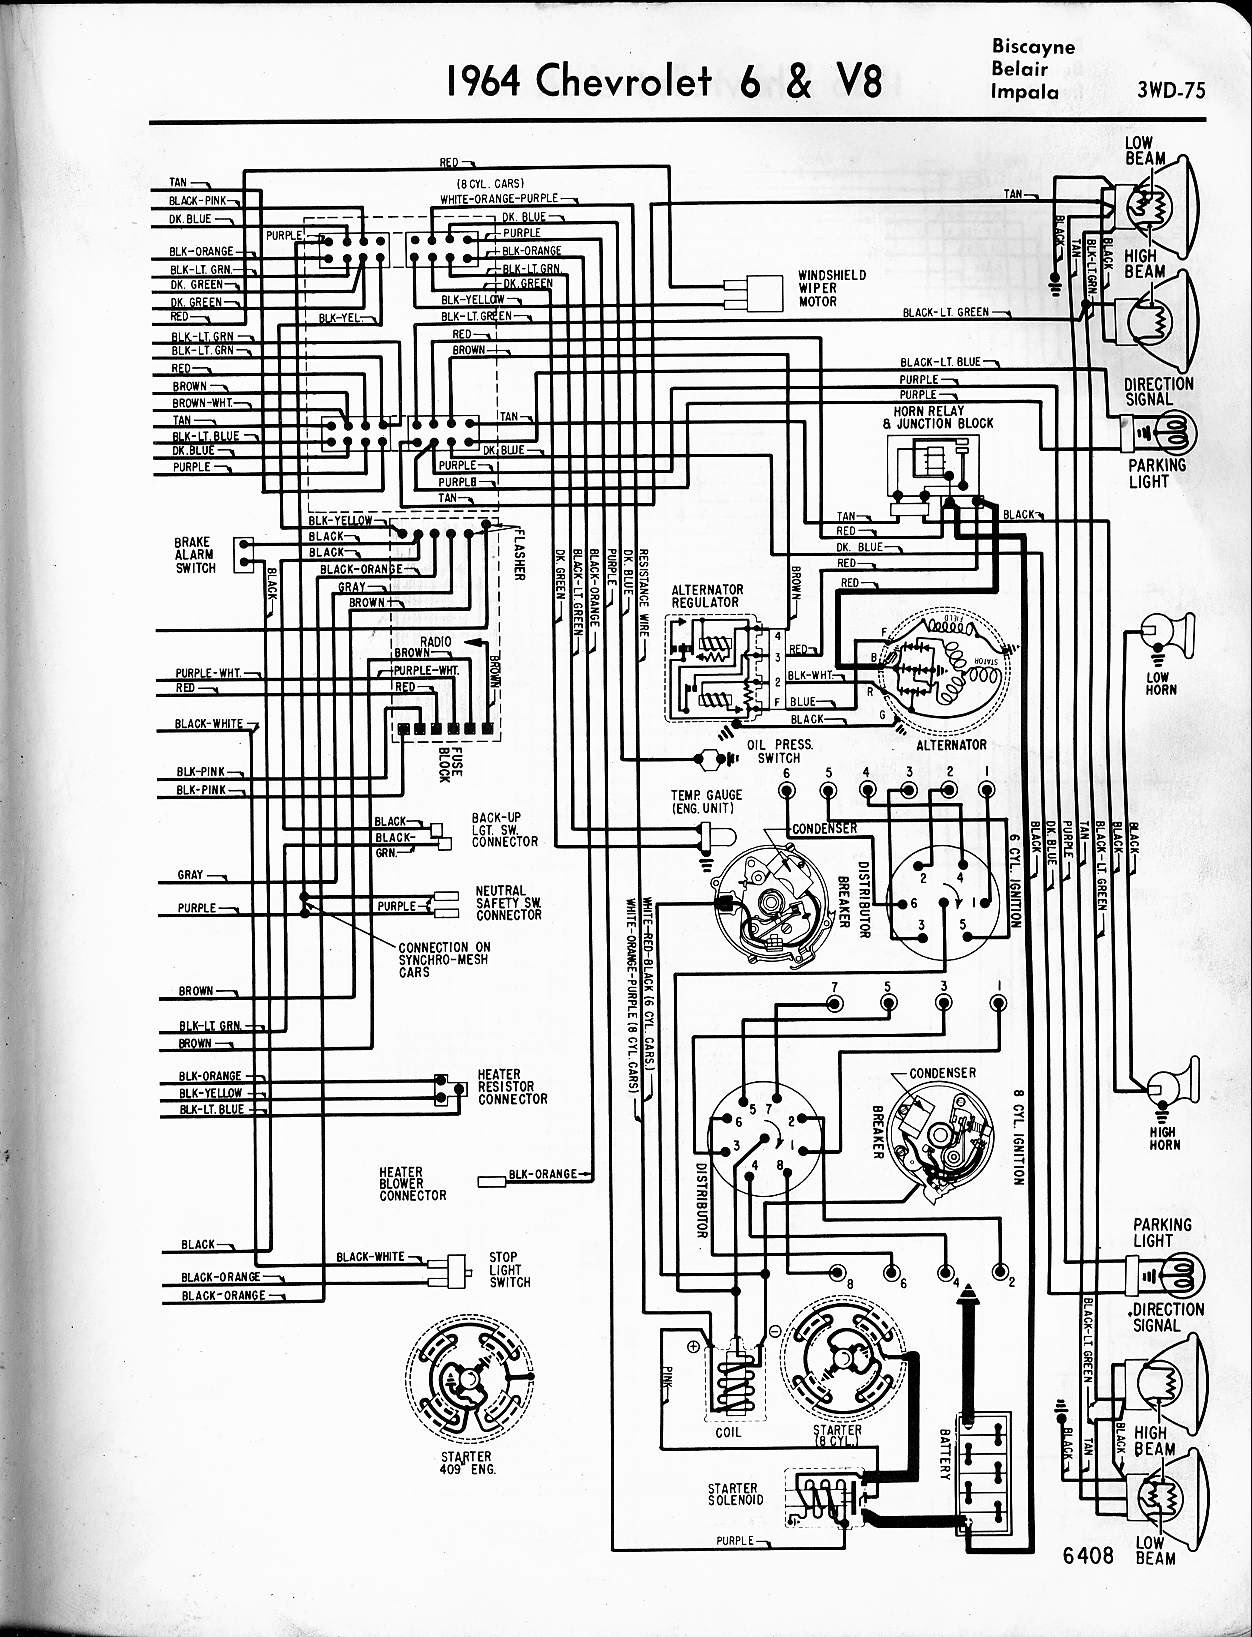 57 Chevy Ignition Switch Wiring Diagram from lh4.googleusercontent.com